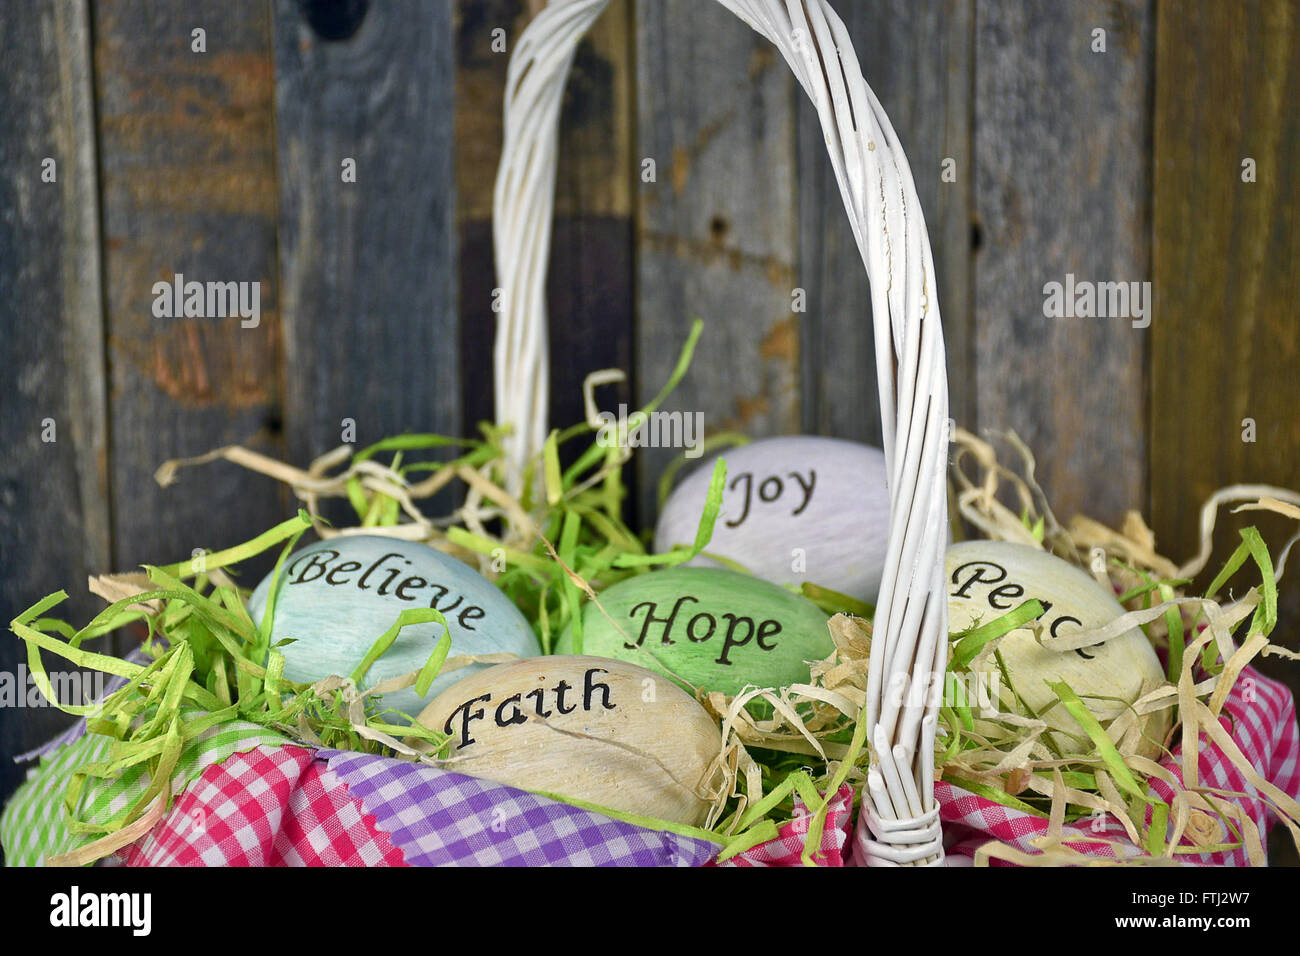 Inspirational message on Easter eggs in wicker basket with gingham fabric. Stock Photo